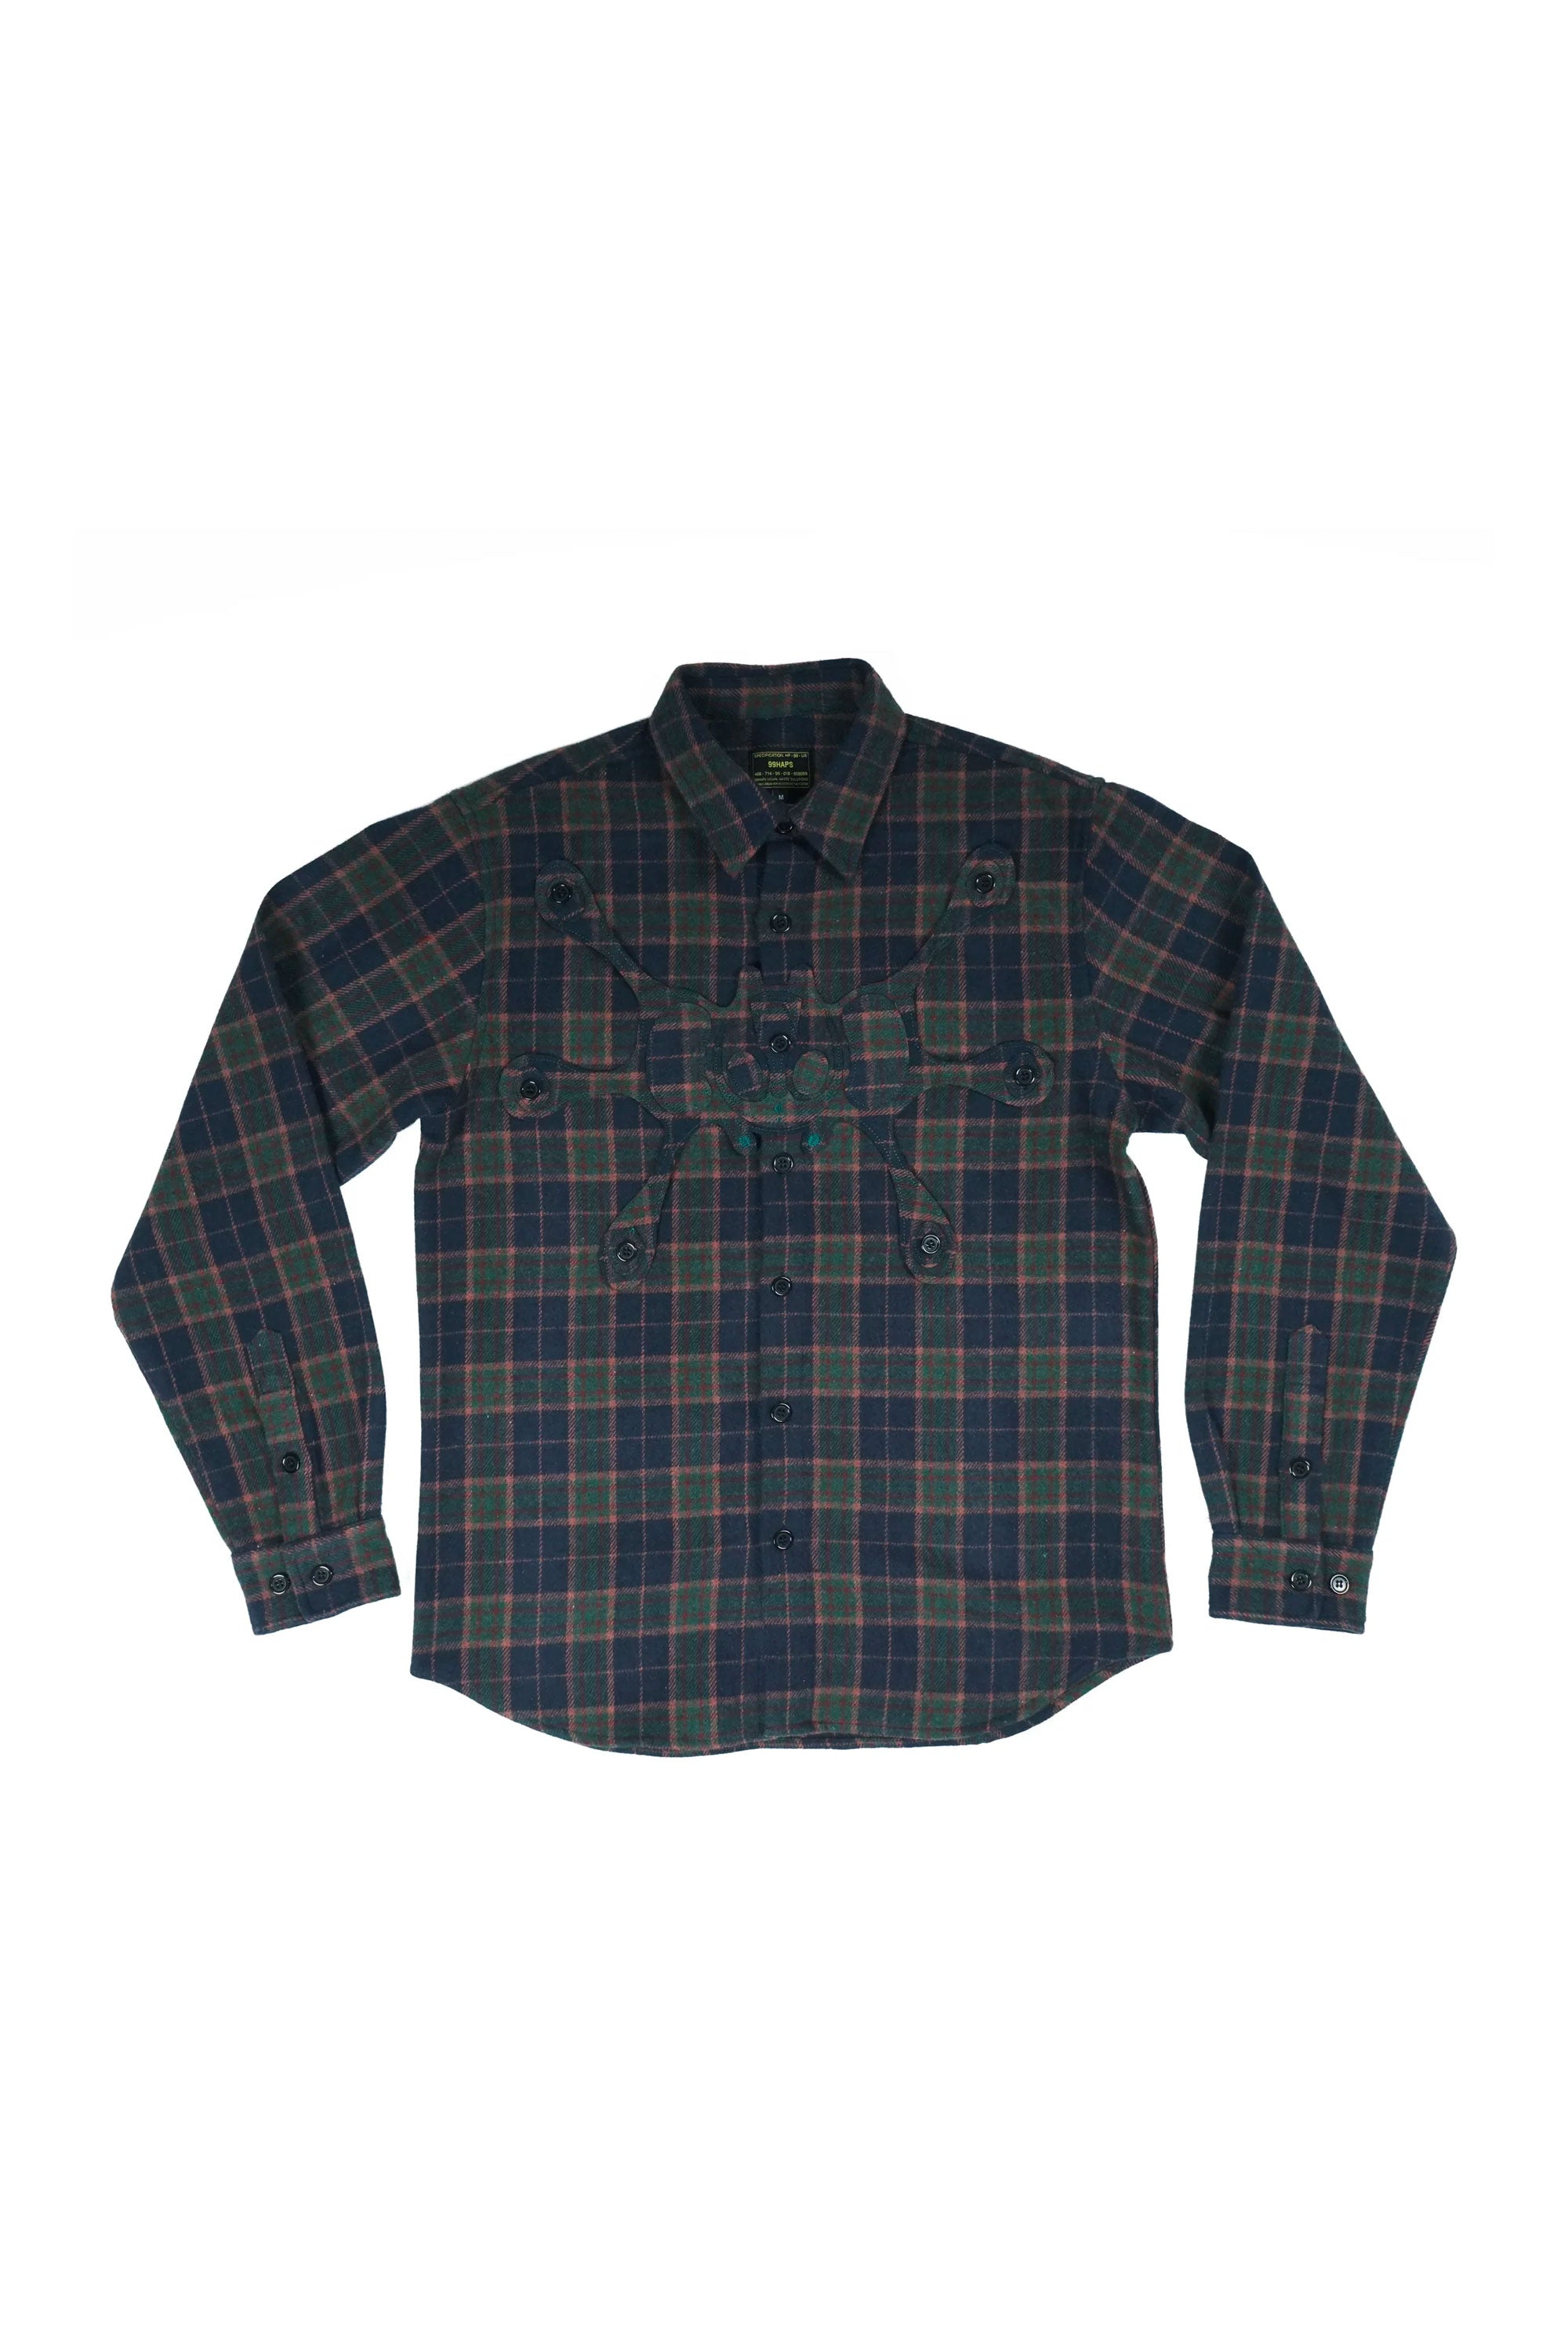 The HAPPY 99 - ANGEL99 BUTTON UP FLANNEL available online with global shipping, and in PAM Stores Melbourne and Sydney.